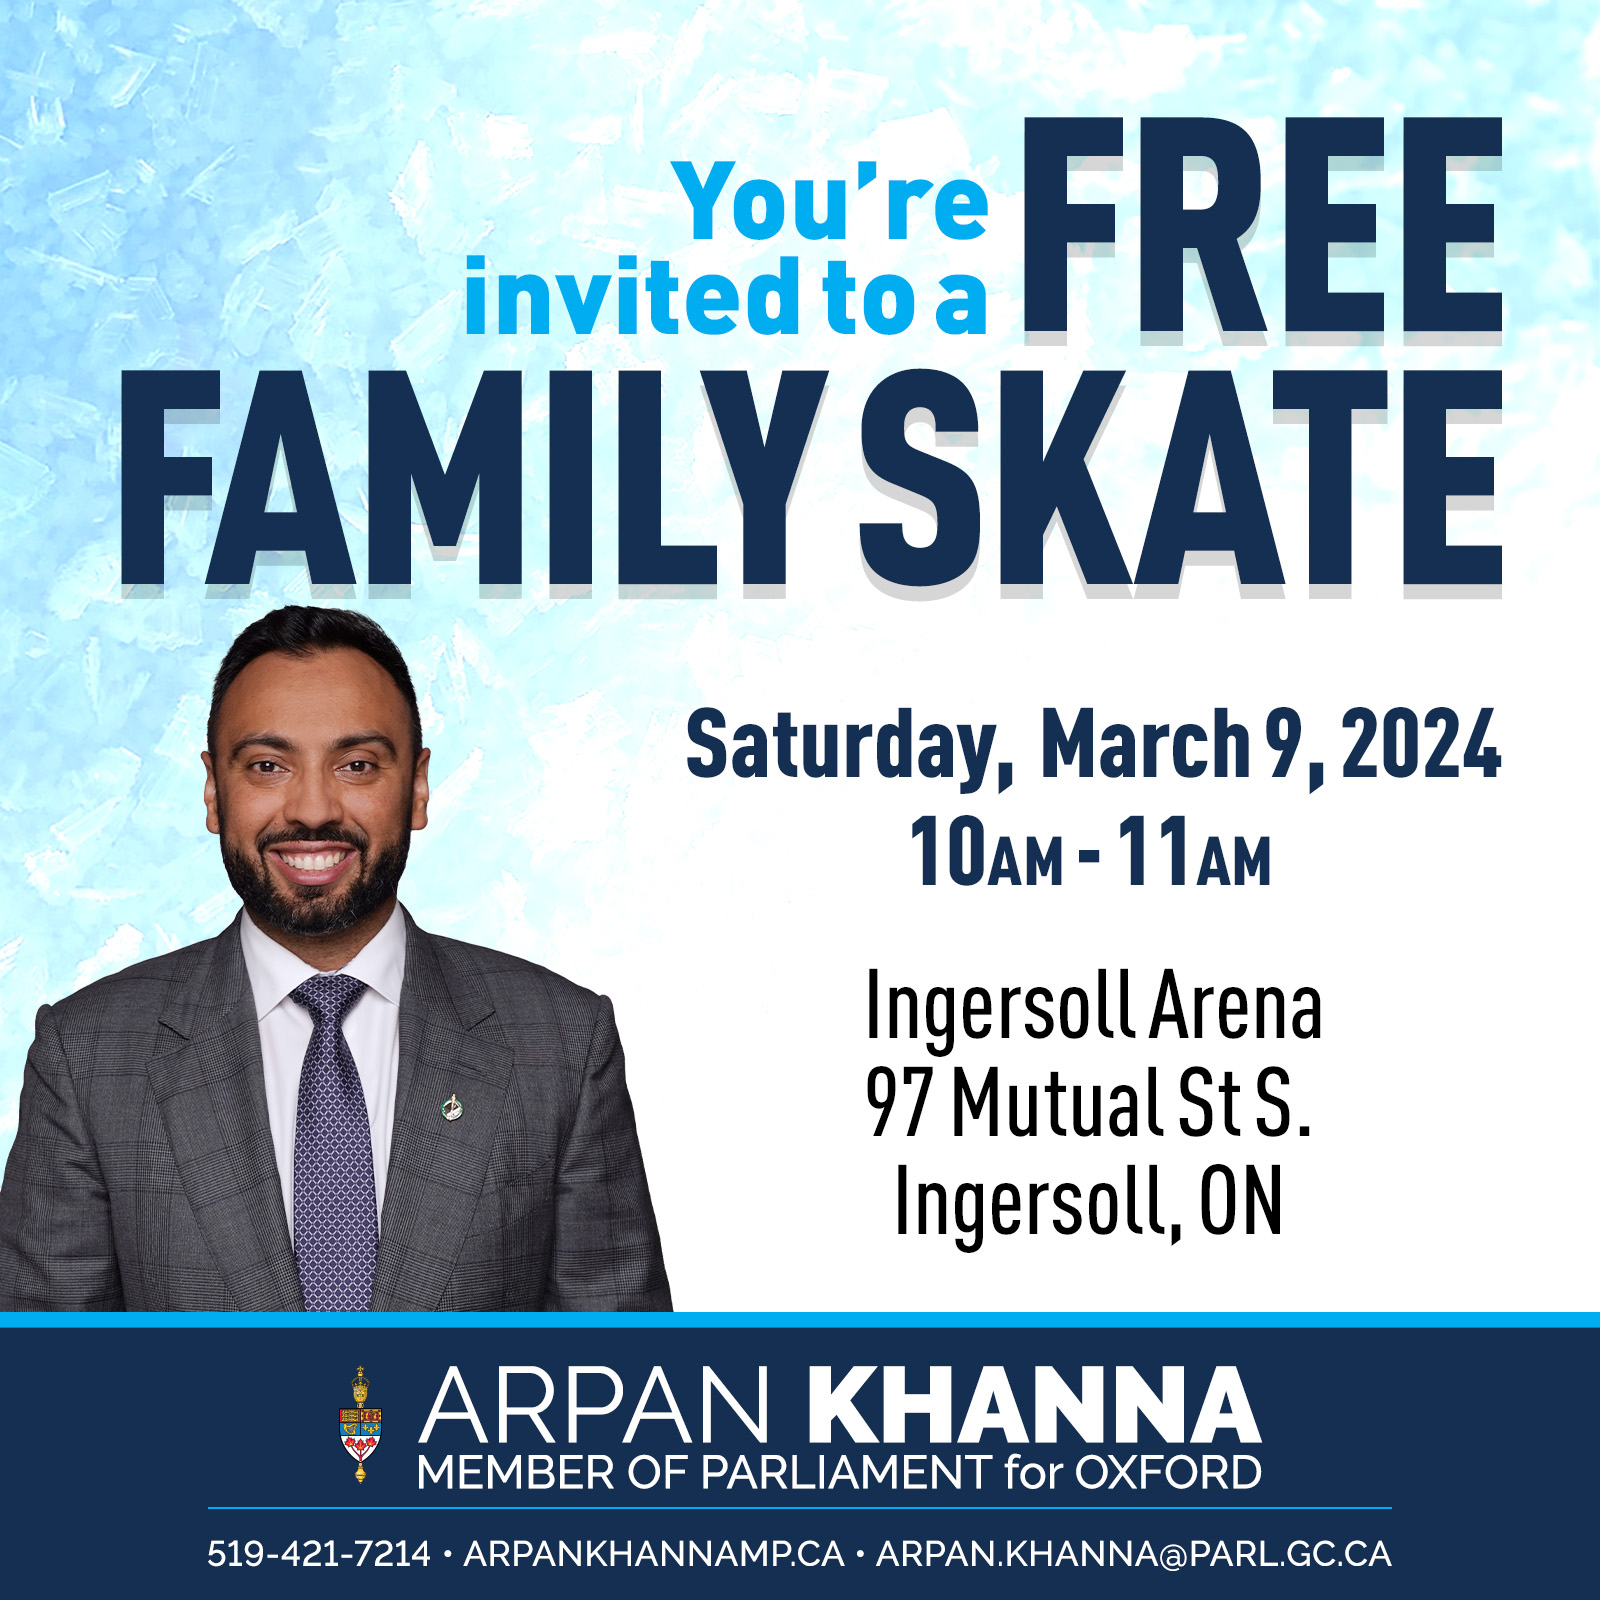 DATE: Saturday, March 9th, 2024 TIME: 10am - 11am LOCATION: Ingersoll District Memorial Centre 97 Mutual St S, Ingersoll, ON DETAILS: Free Community Skate in Ingersoll. Will ask Phil about table set up with Hot chocolate/cookies for the family. Bring donations for foodbank.